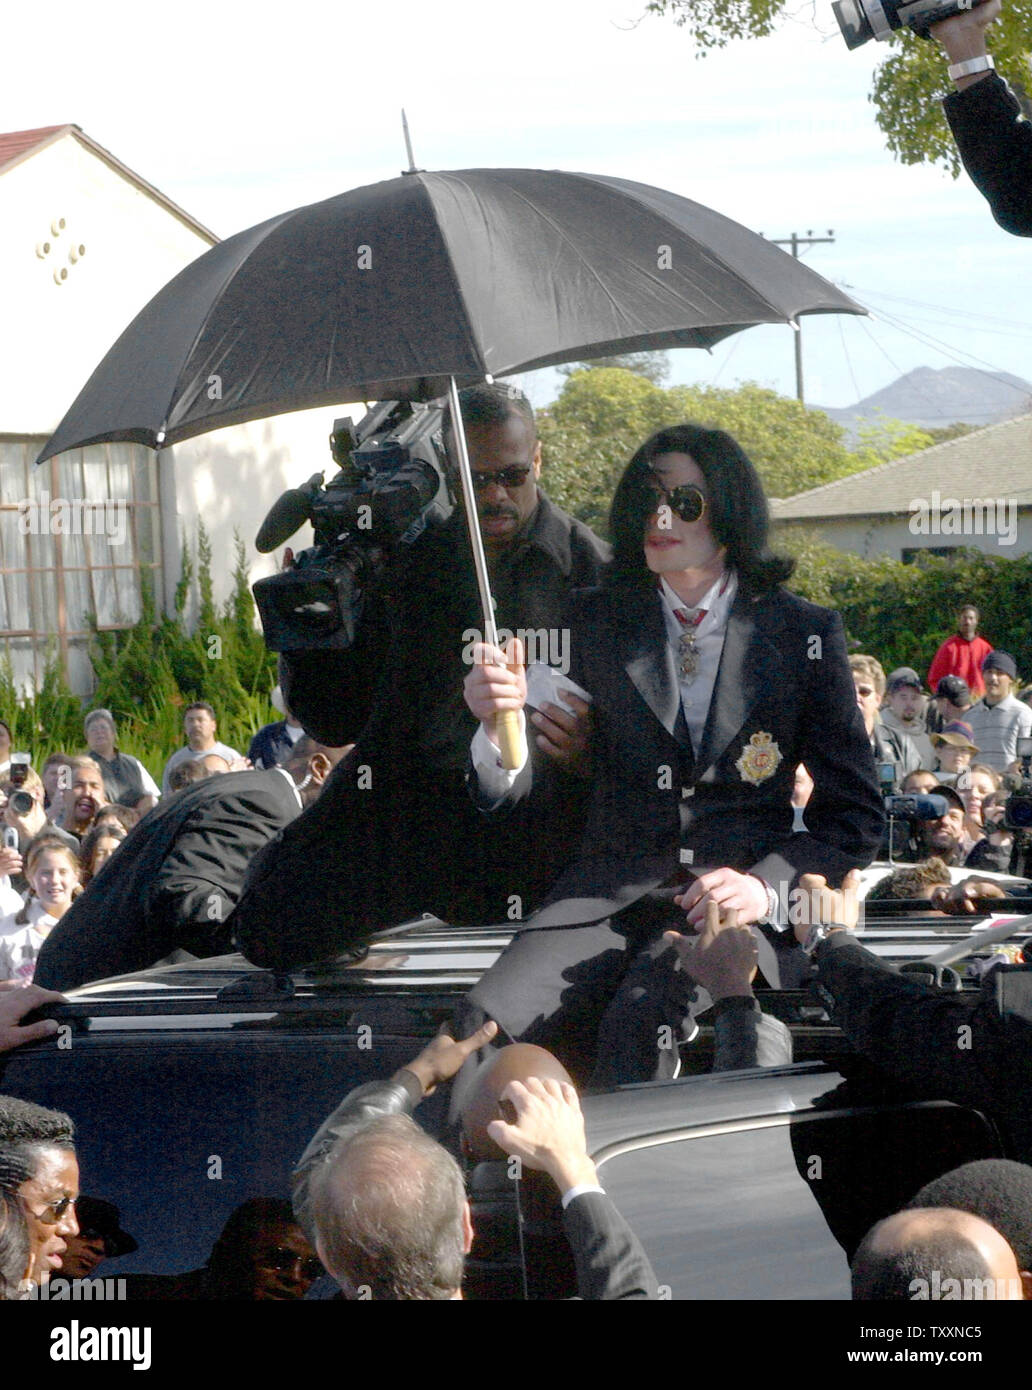 Pop star Michael Jackson climbs down from his SUV after leaving the courthouse in Santa Maria, California January 16, 2004. Jackson pleaded innocent to child molestation charges on Friday during a hearing in which a California judge gave the onetime 'King of Pop' a stern lecture for showing up late and slapped a gag order on his high-profile legal team. The two men with Jackson are his personal videographers.  (UPI Photo/Jim Ruymen) Stock Photo